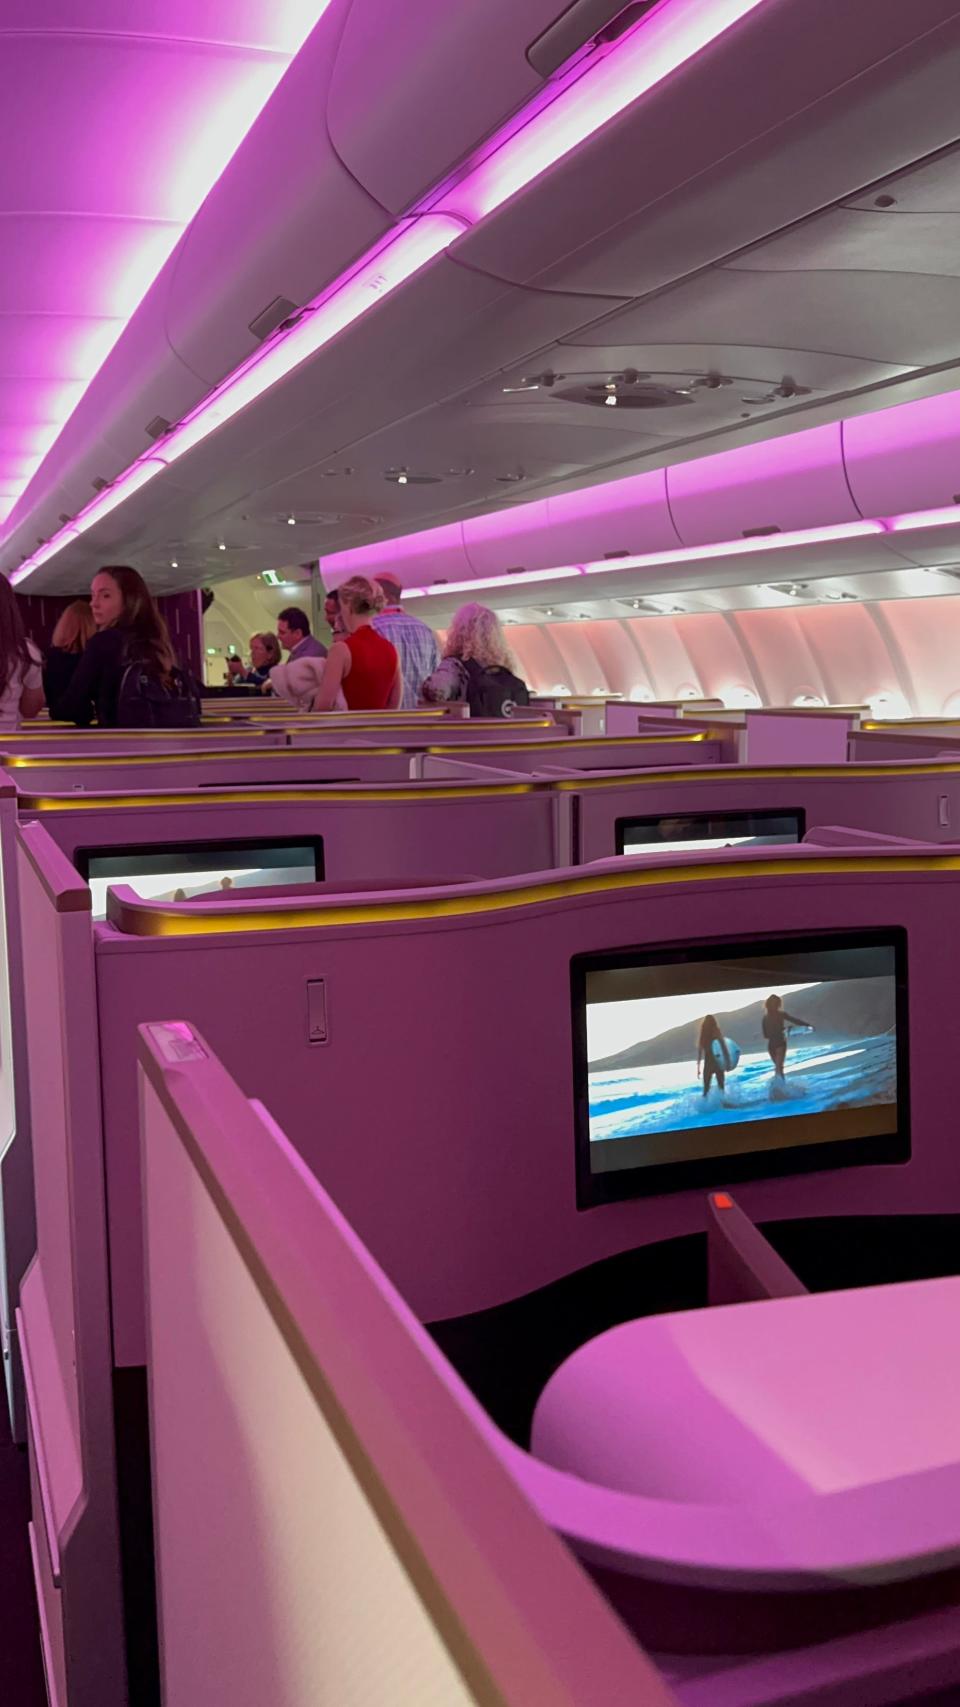 Upper class cabin on Virgin Atlantic airplane, Dan Koday, " I was one of the first people to see Virgin Atlantic's newest aircraft that will fly between NYC and London."